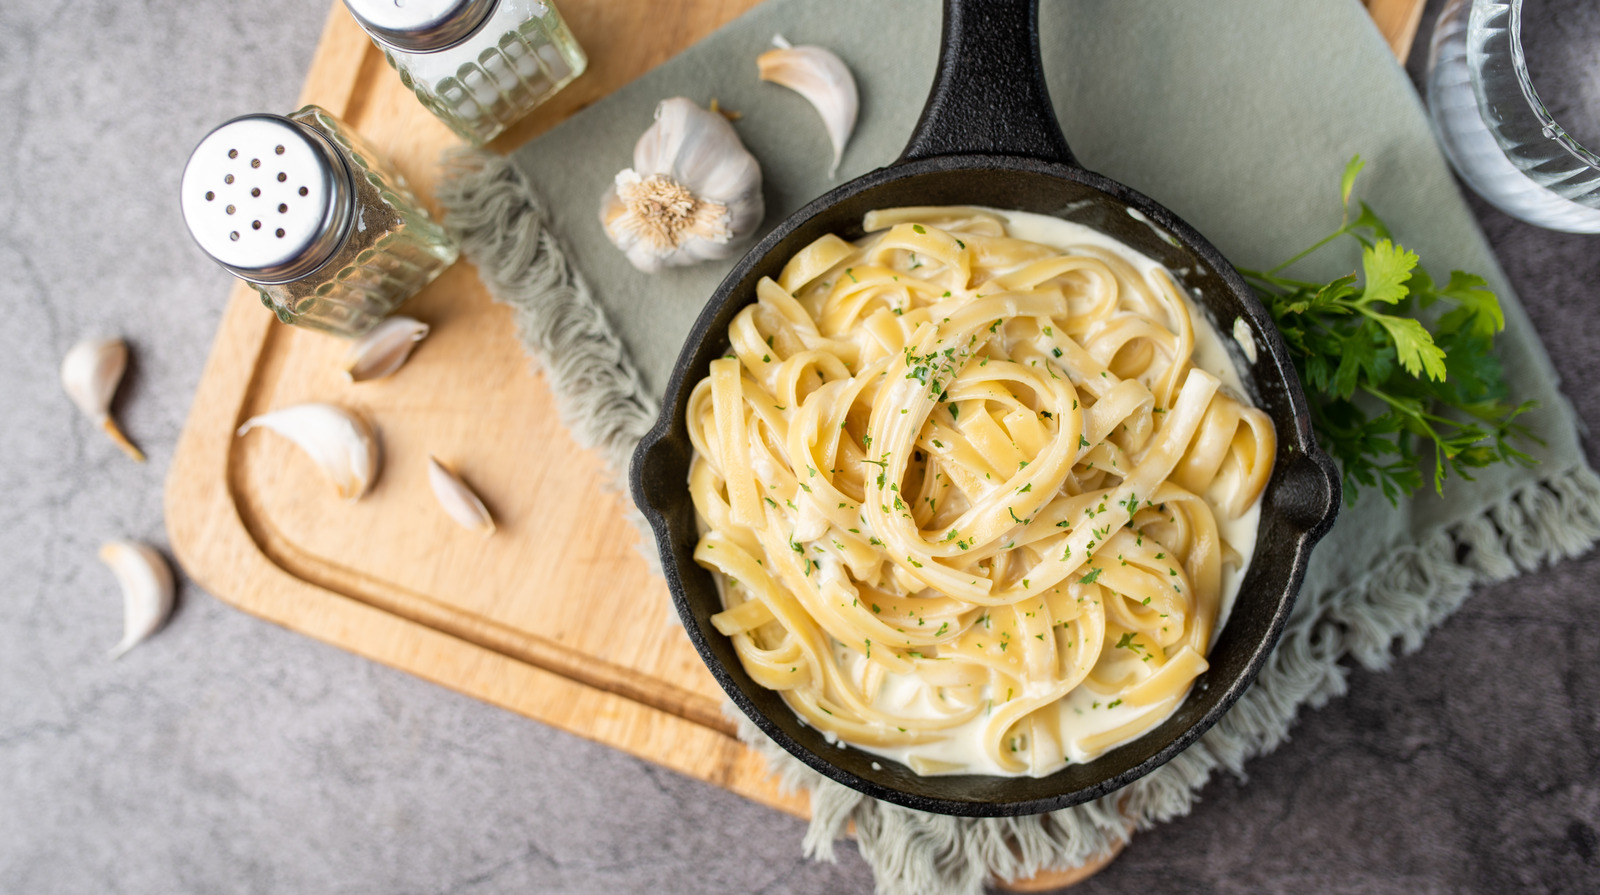 The Original Alfredo Sauce Was Simpler Than You Might Think